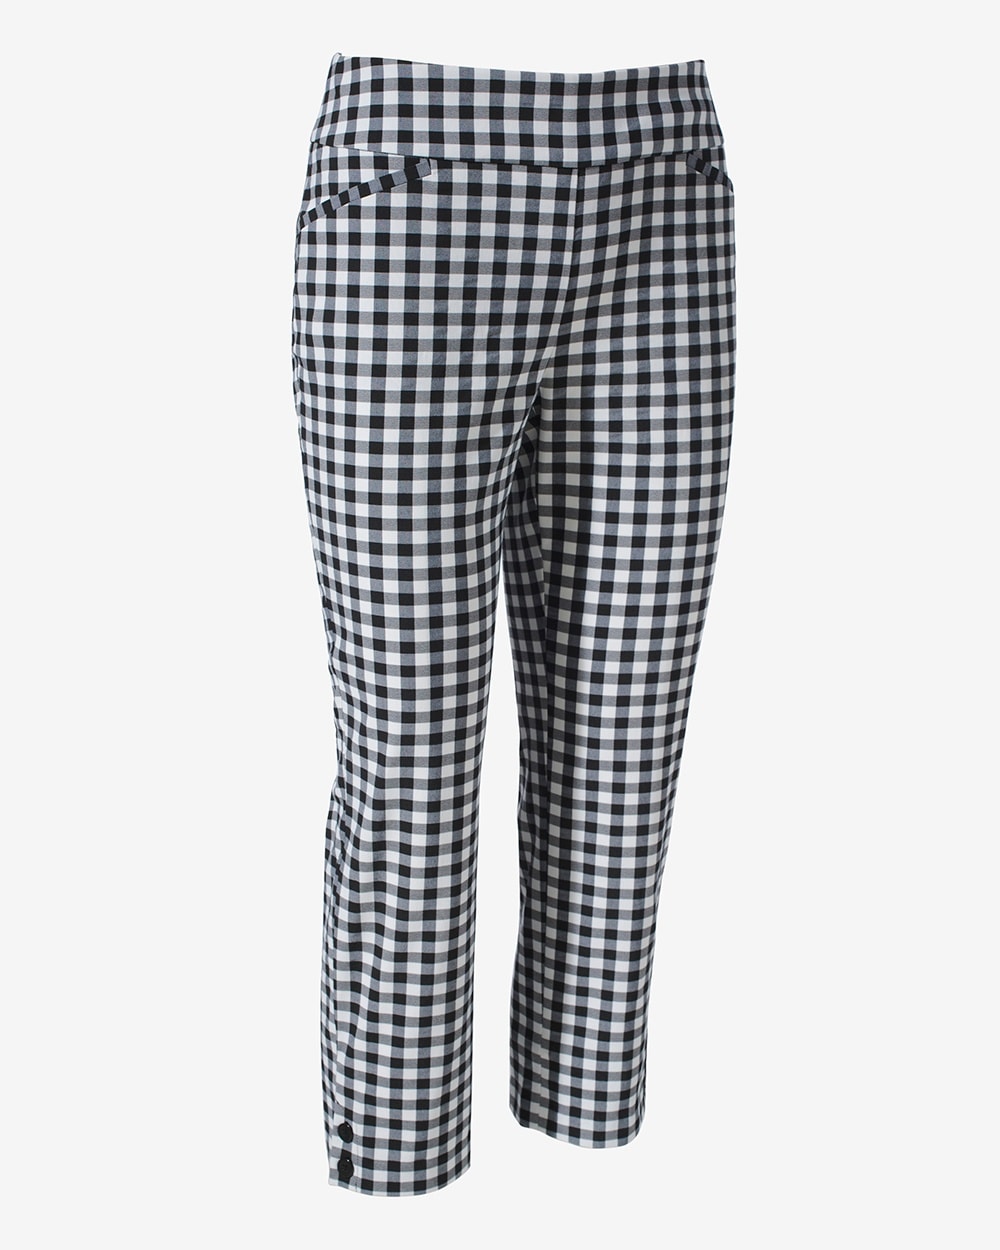 Perfect Stretch Fabulously Slimming Gingham Crop Pants